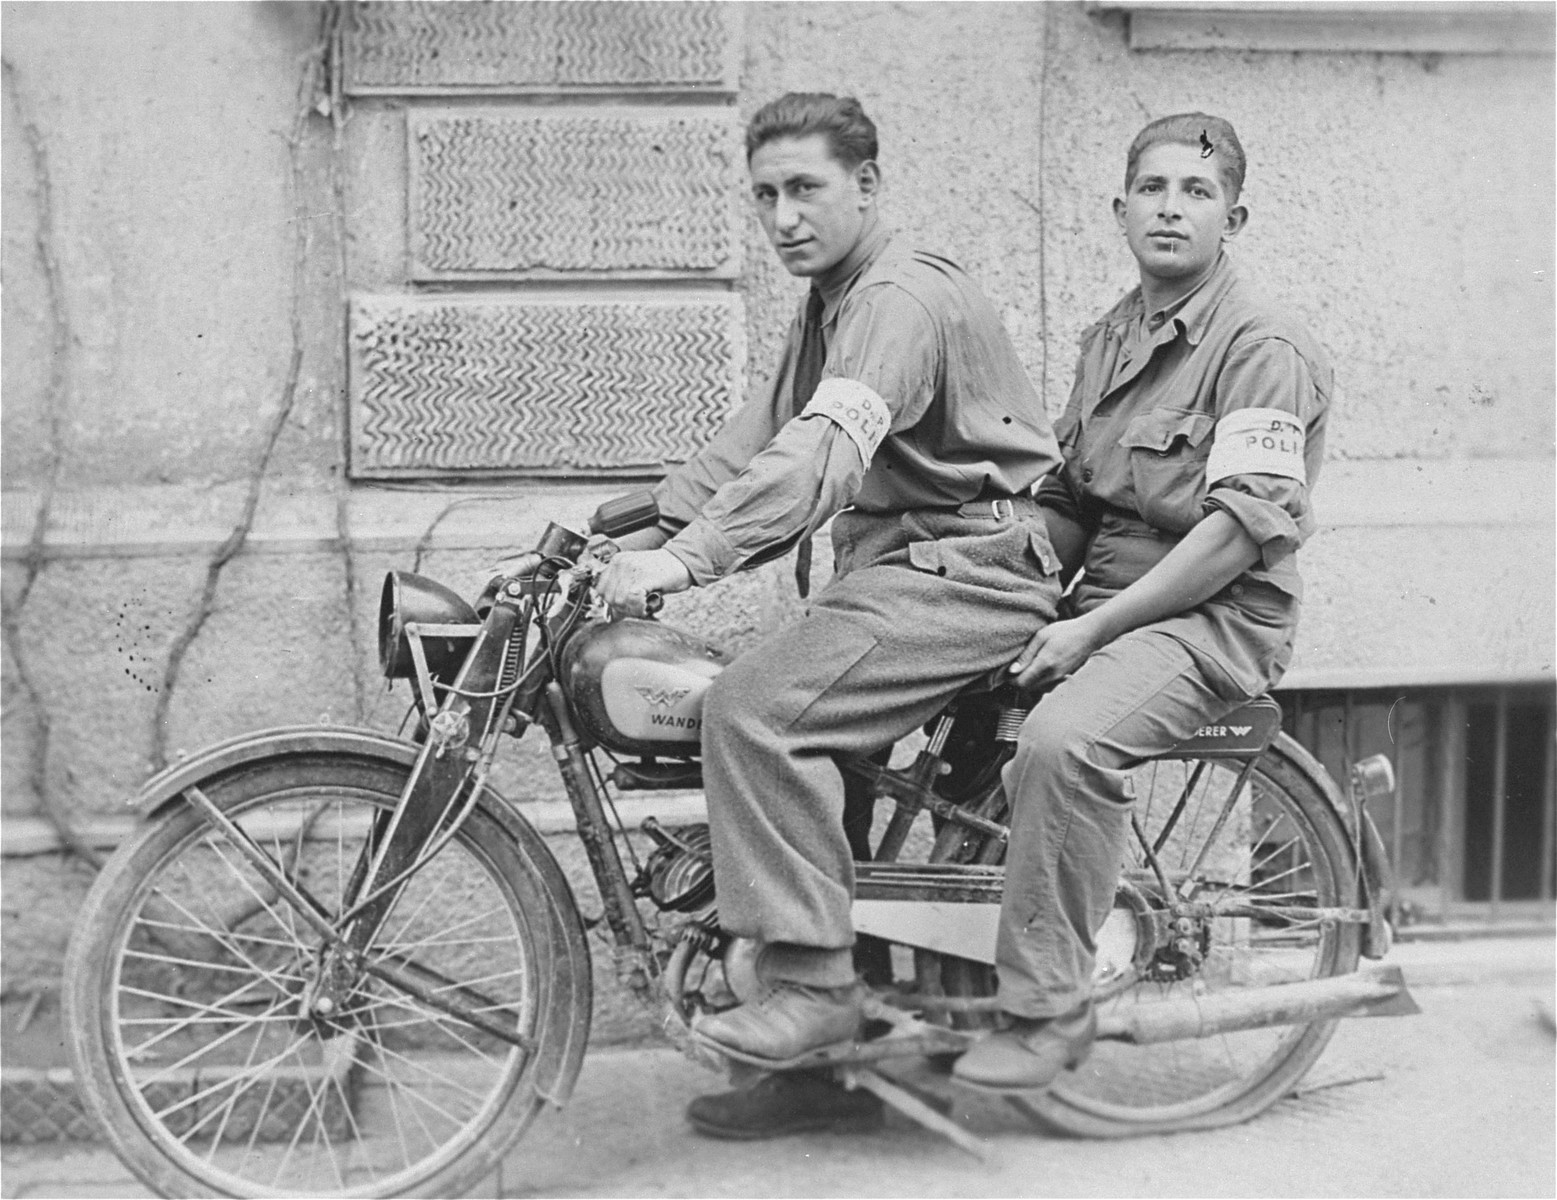 Two members of the Jewish police in the Landsberg displaced persons camp ride on a motorcycle.

Pictured in front is Emil Herskowicz.